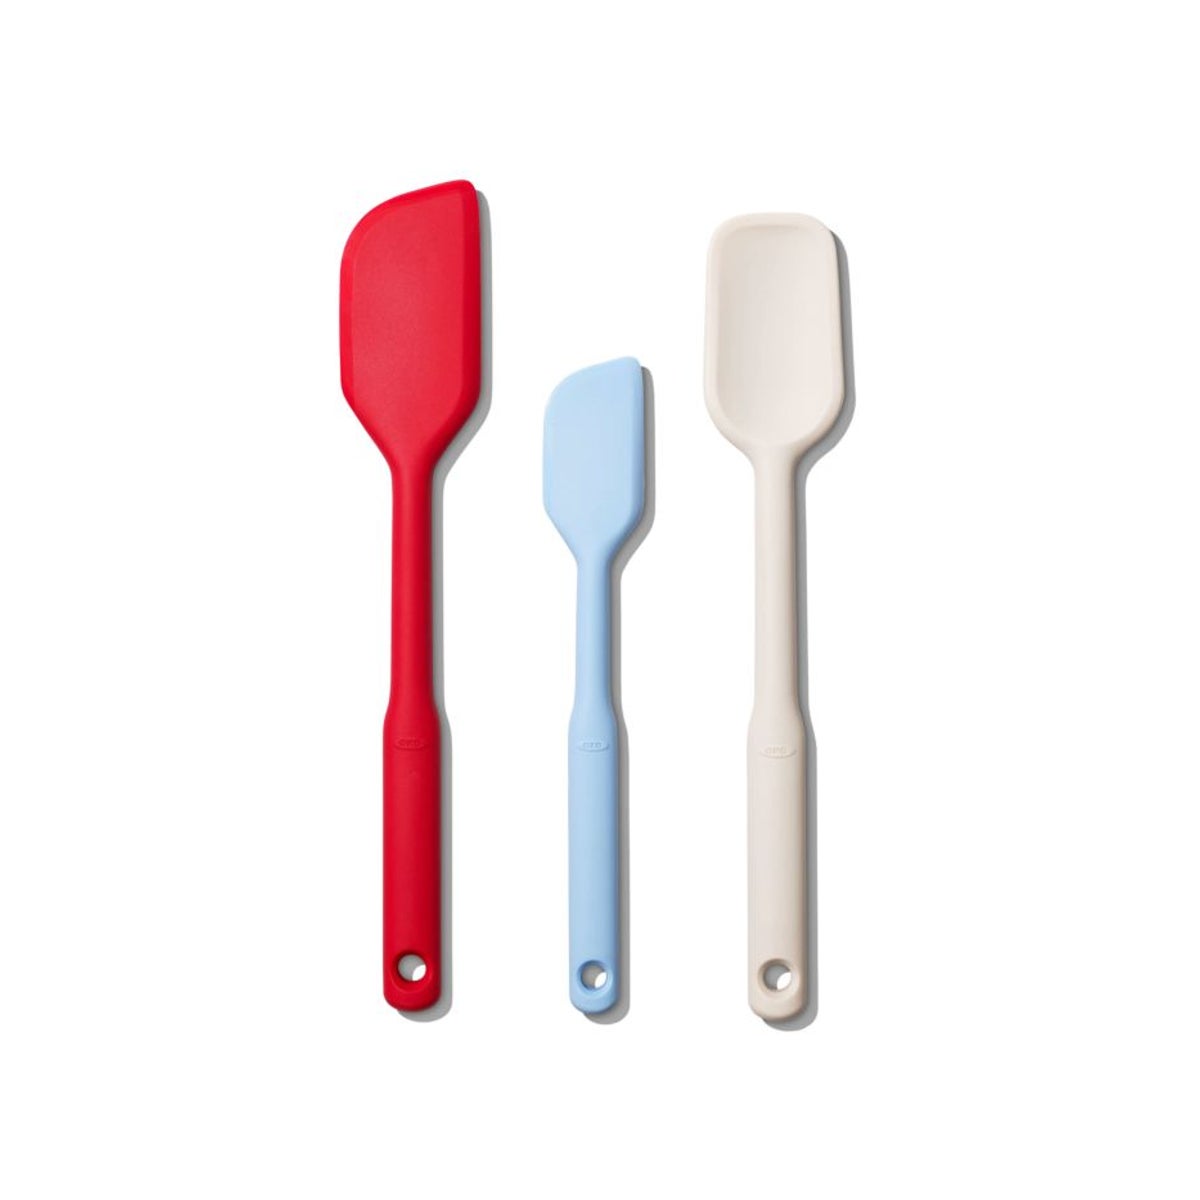 Five14 Silicone Cooking Utensils, Kitchen Utensils, Cooking Utensils Set -  Silicone Spatula, Tongs, …See more Five14 Silicone Cooking Utensils